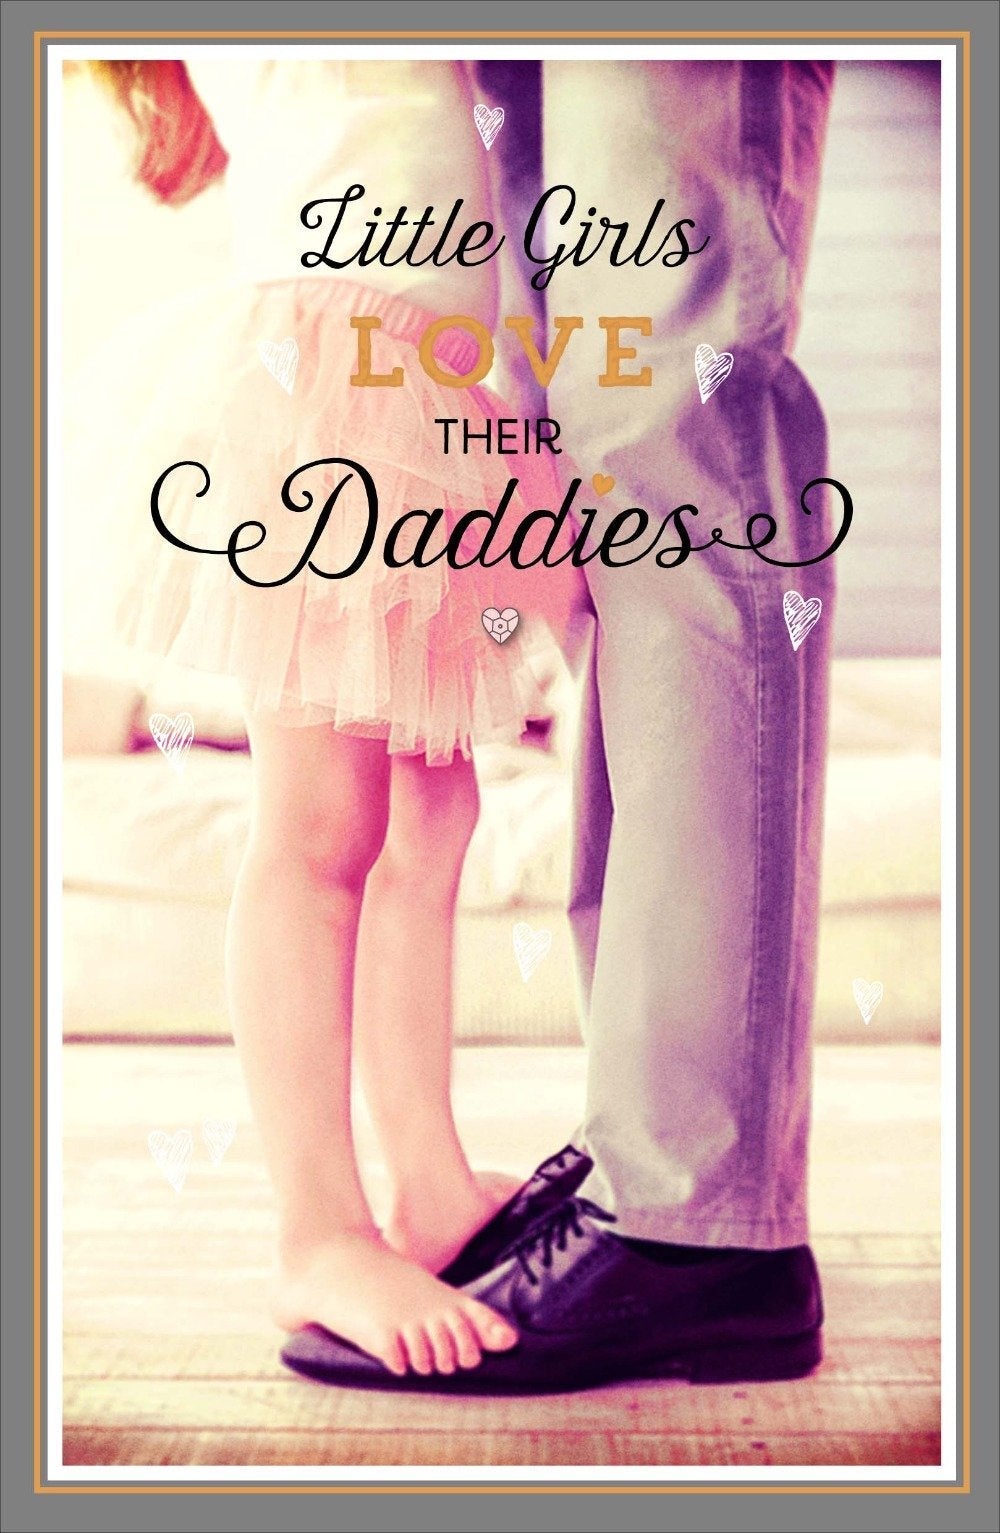 Fathers Day Card - Dad From Daughter / The Nacked Girls Feet Standing On Fathers Shoes